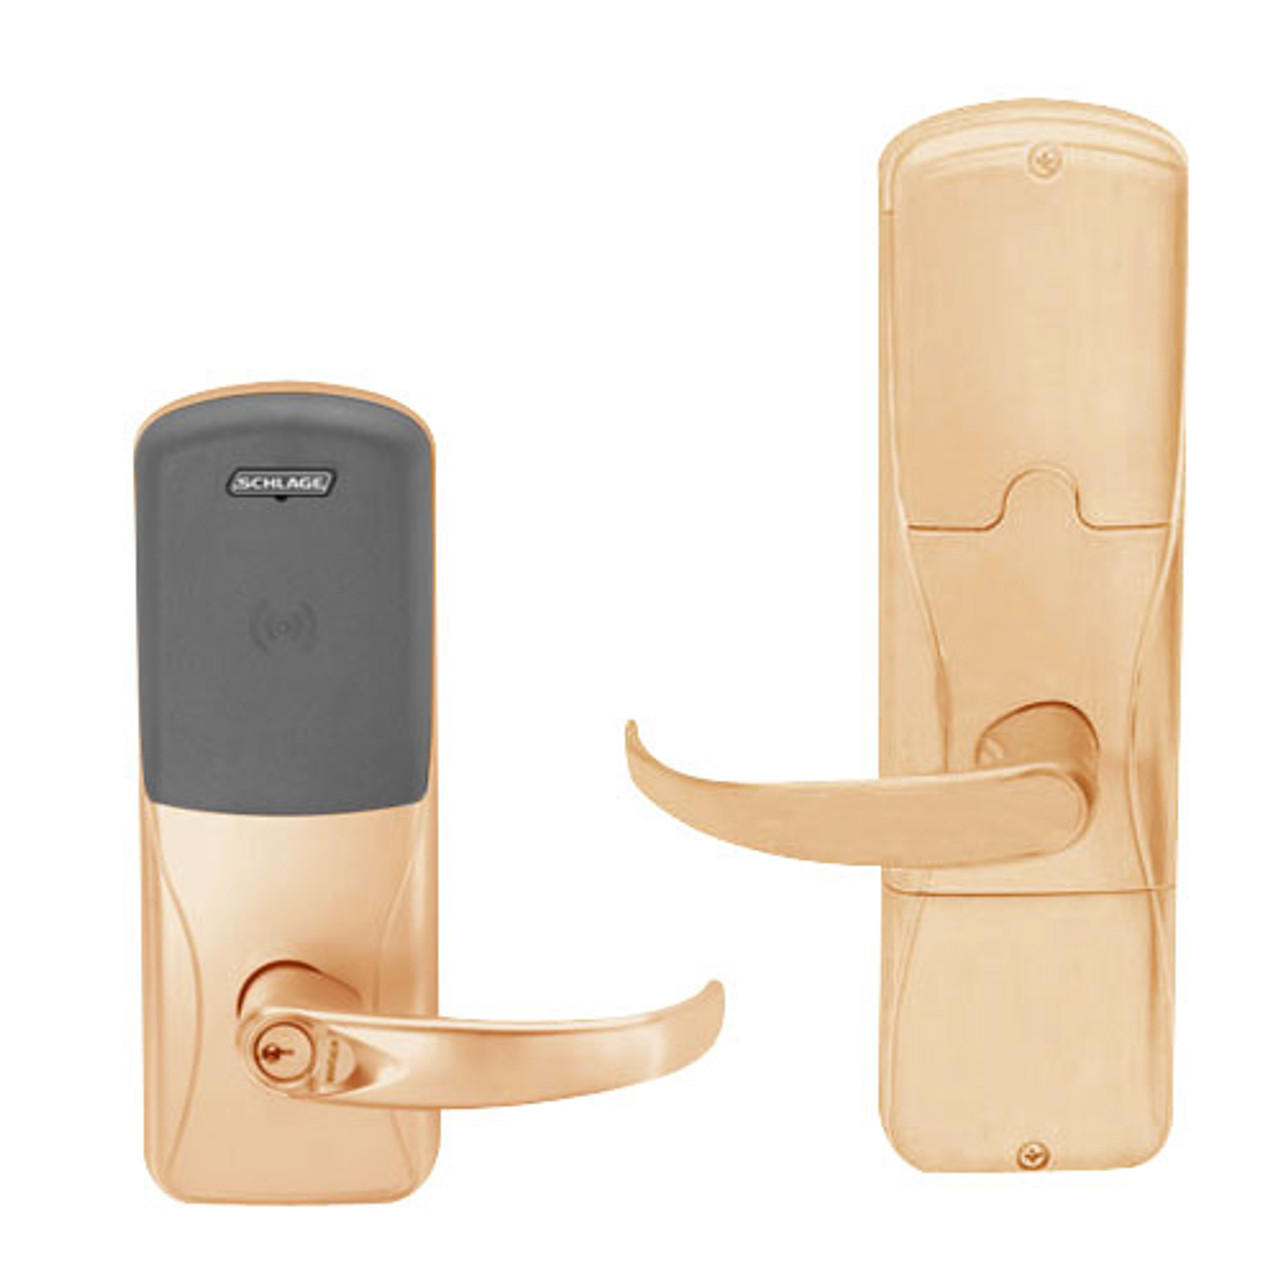 AD200-MD-40-MT-SPA-GD-29R-612 Schlage Privacy Mortise Deadbolt Multi-Technology Lock with Sparta Lever in Satin Bronze